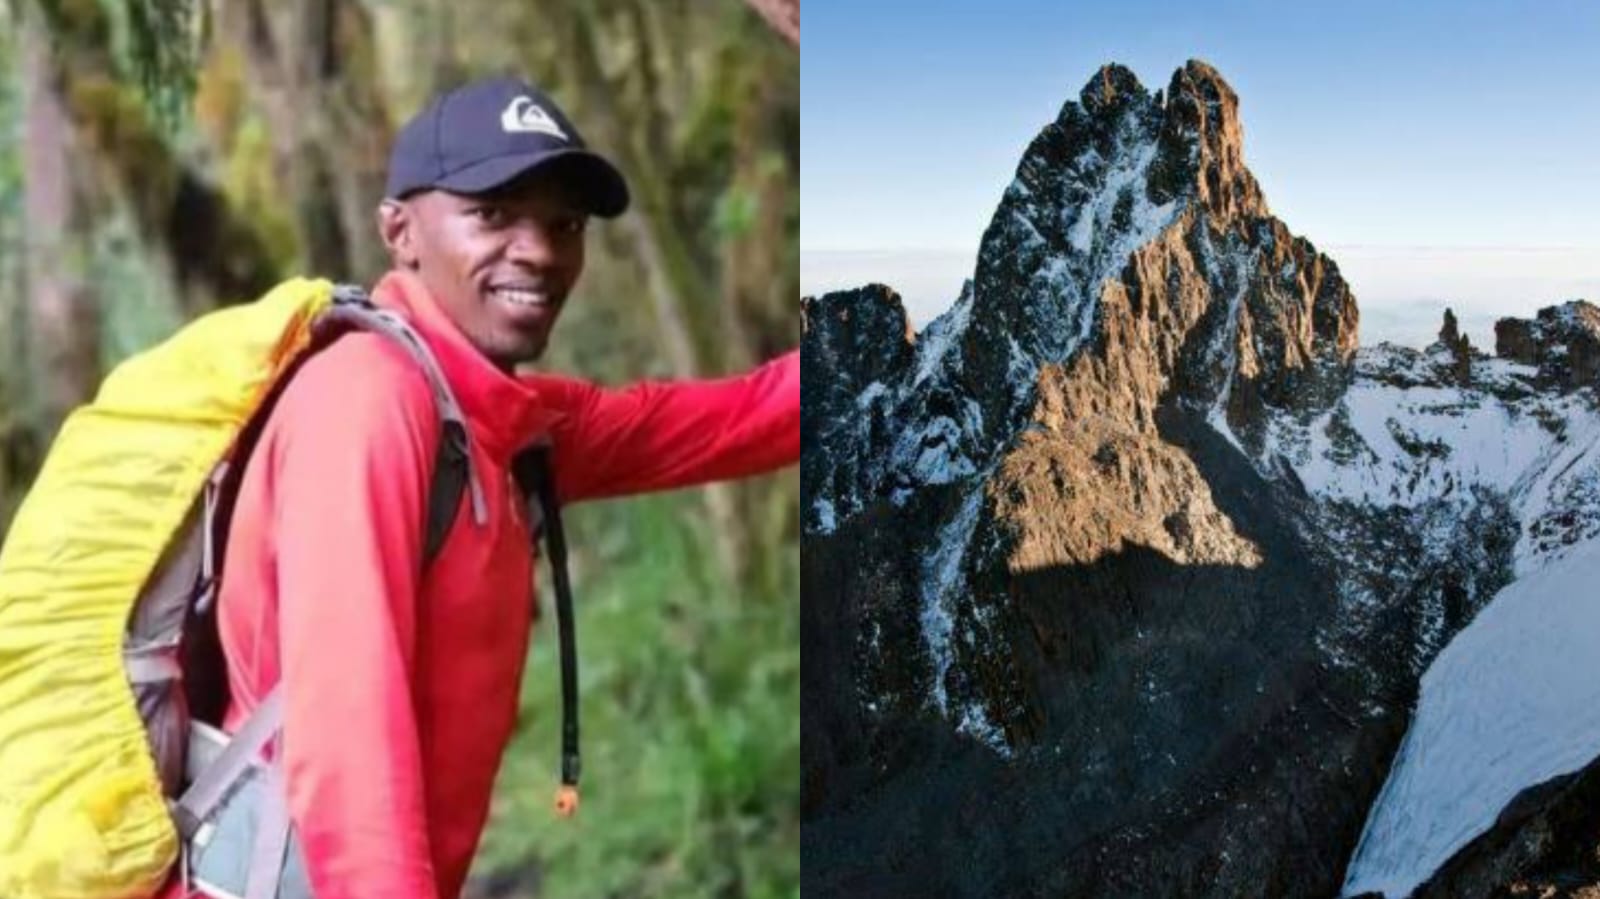 A Kenyan Guide Dies While Trying to Rescue a British Climber while descending Mount Kenya